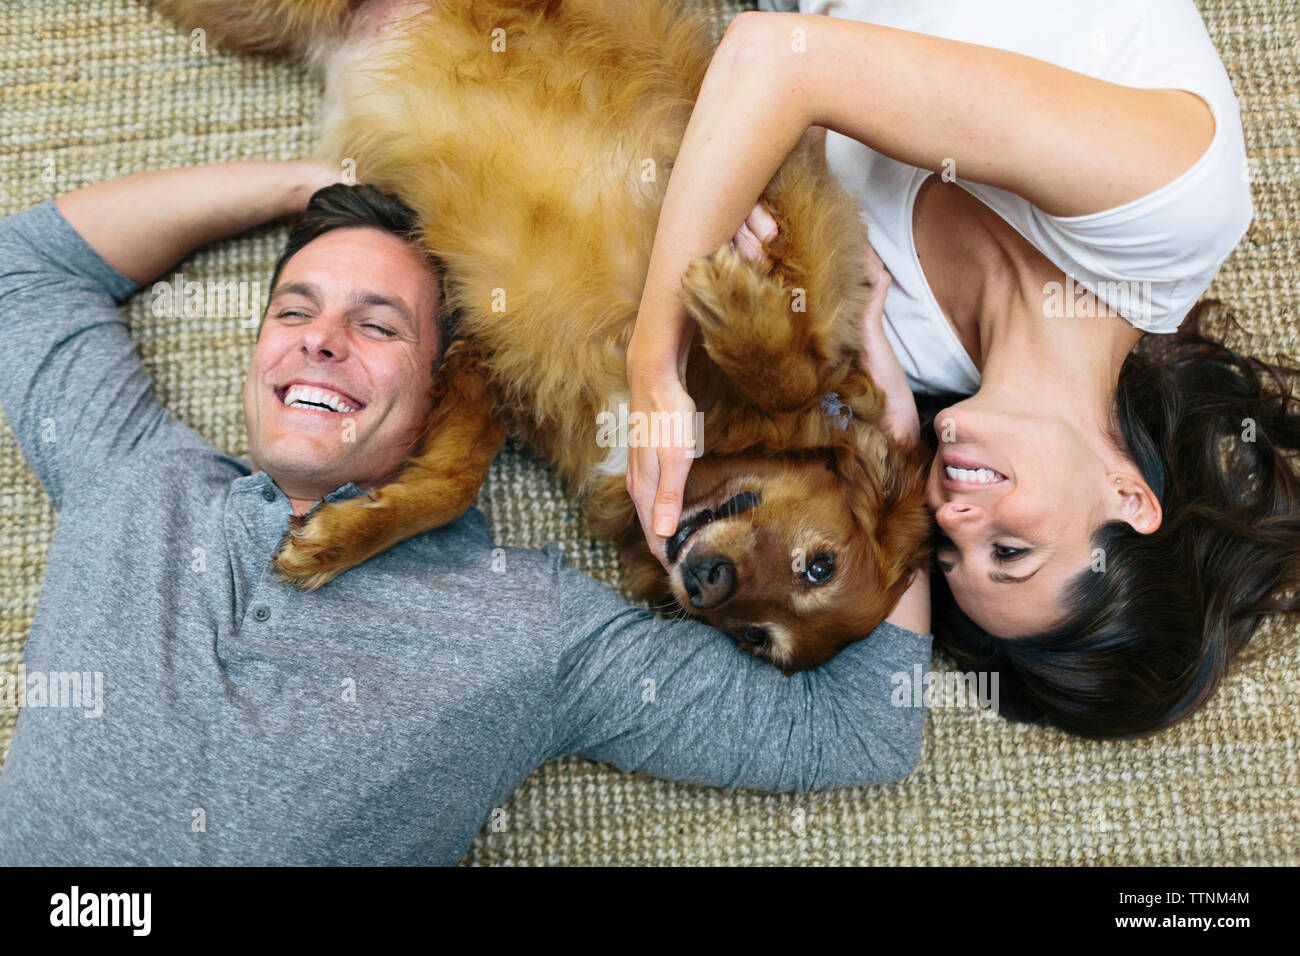 Overhead view of couple with dog lying on carpet at home Stock Photo